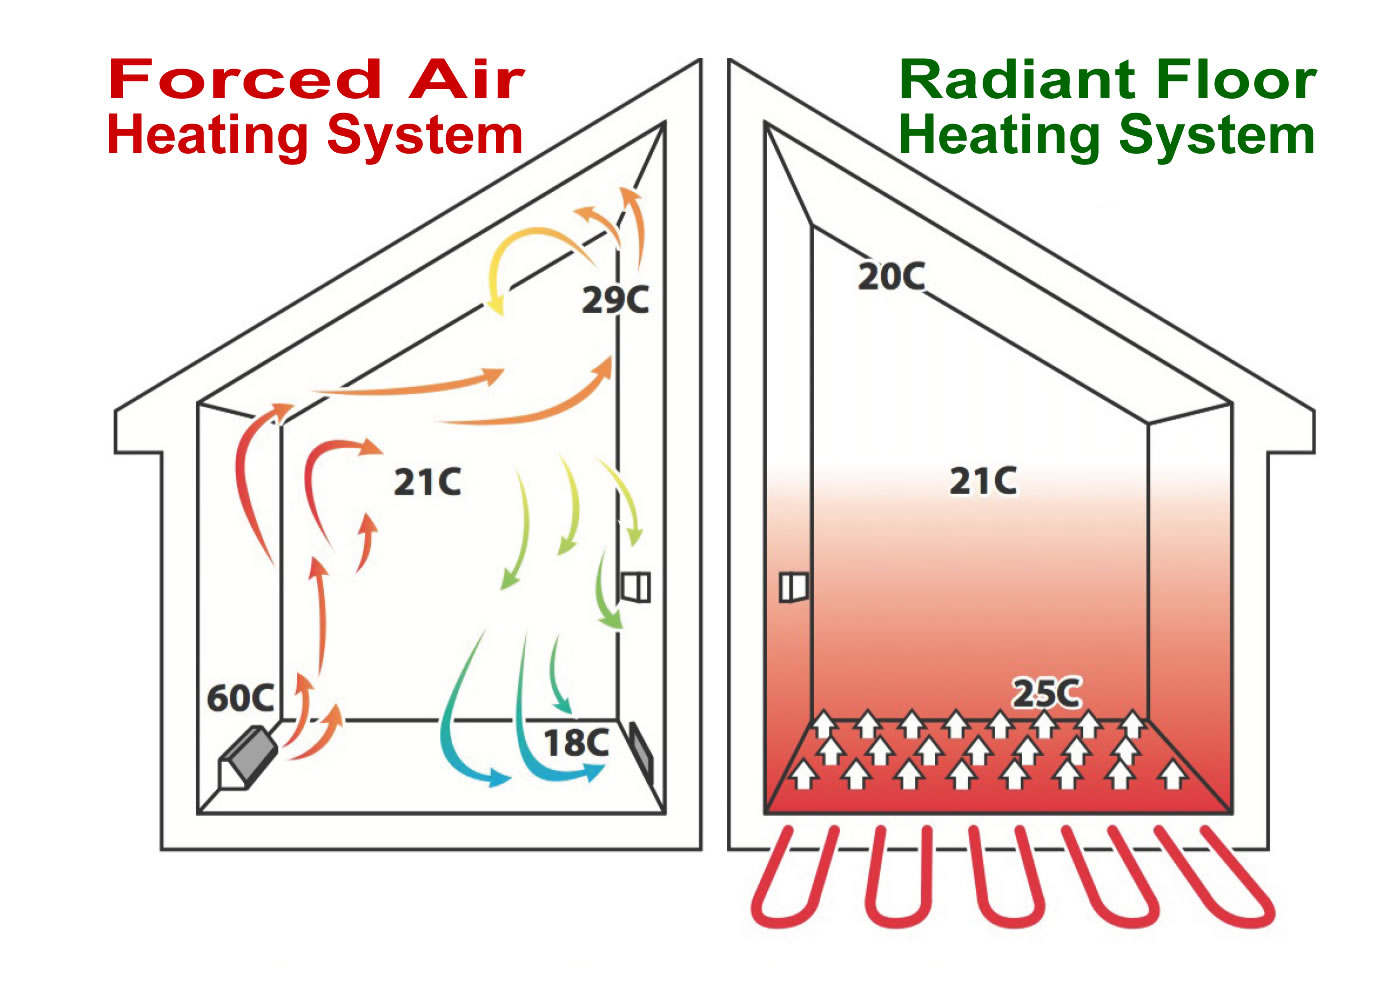 Forced air heating system vs radiant floor heating systems form Thompson Electrical in MArlborough NZ